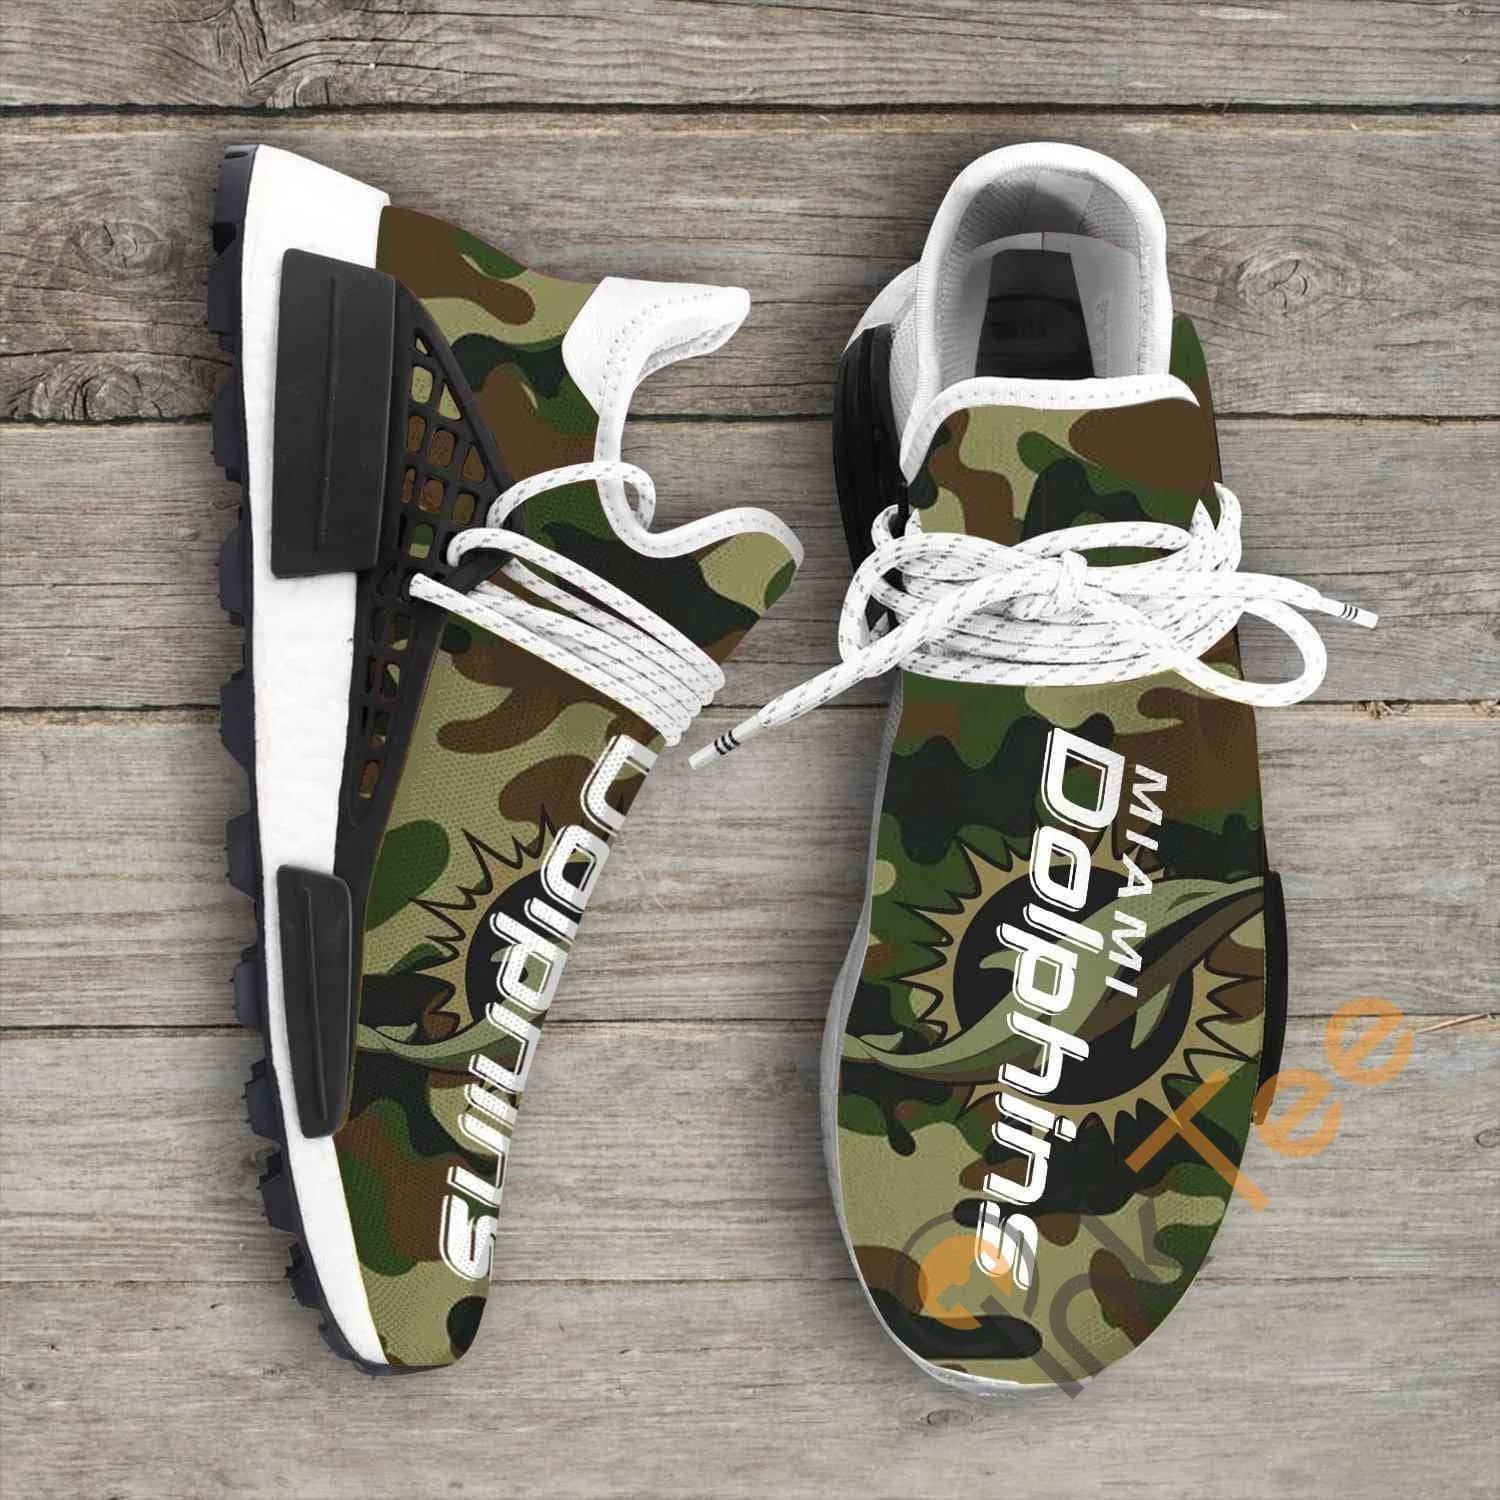 Camo Camouflage Miami Dolphins Nfl Sport Teams Ha02 Nmd Human Shoes